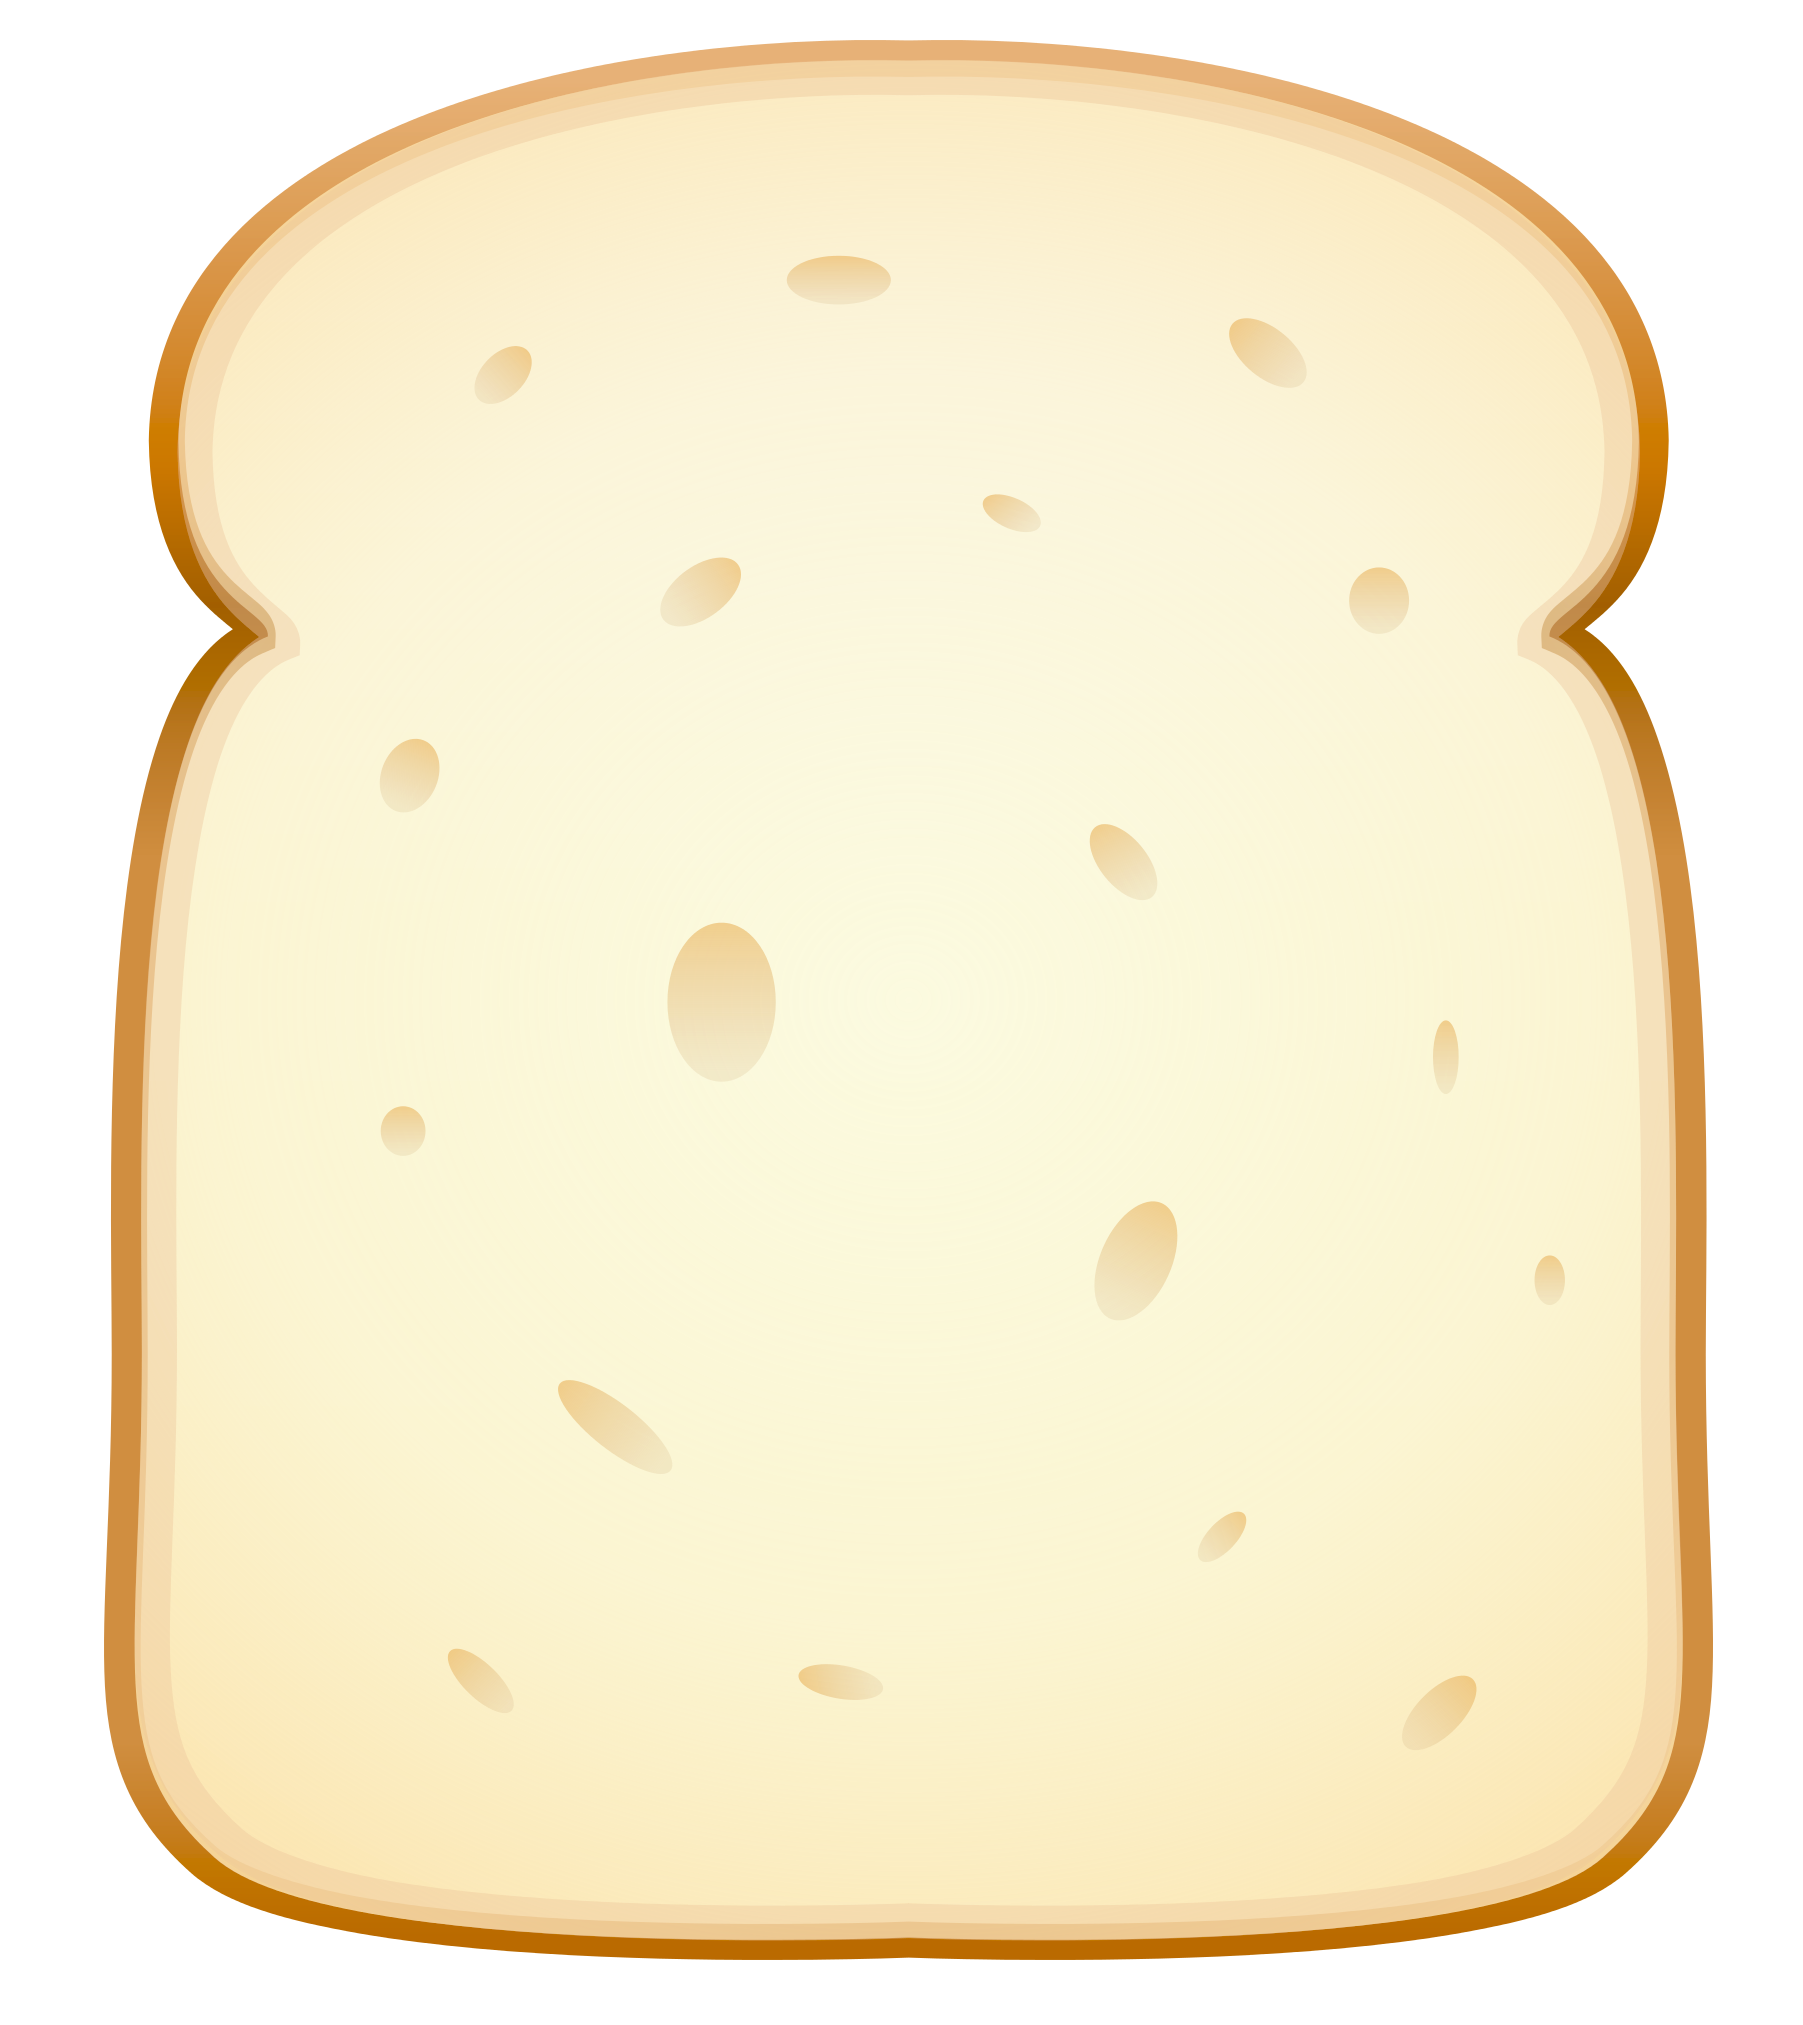 A Slice Of Bread With Holes